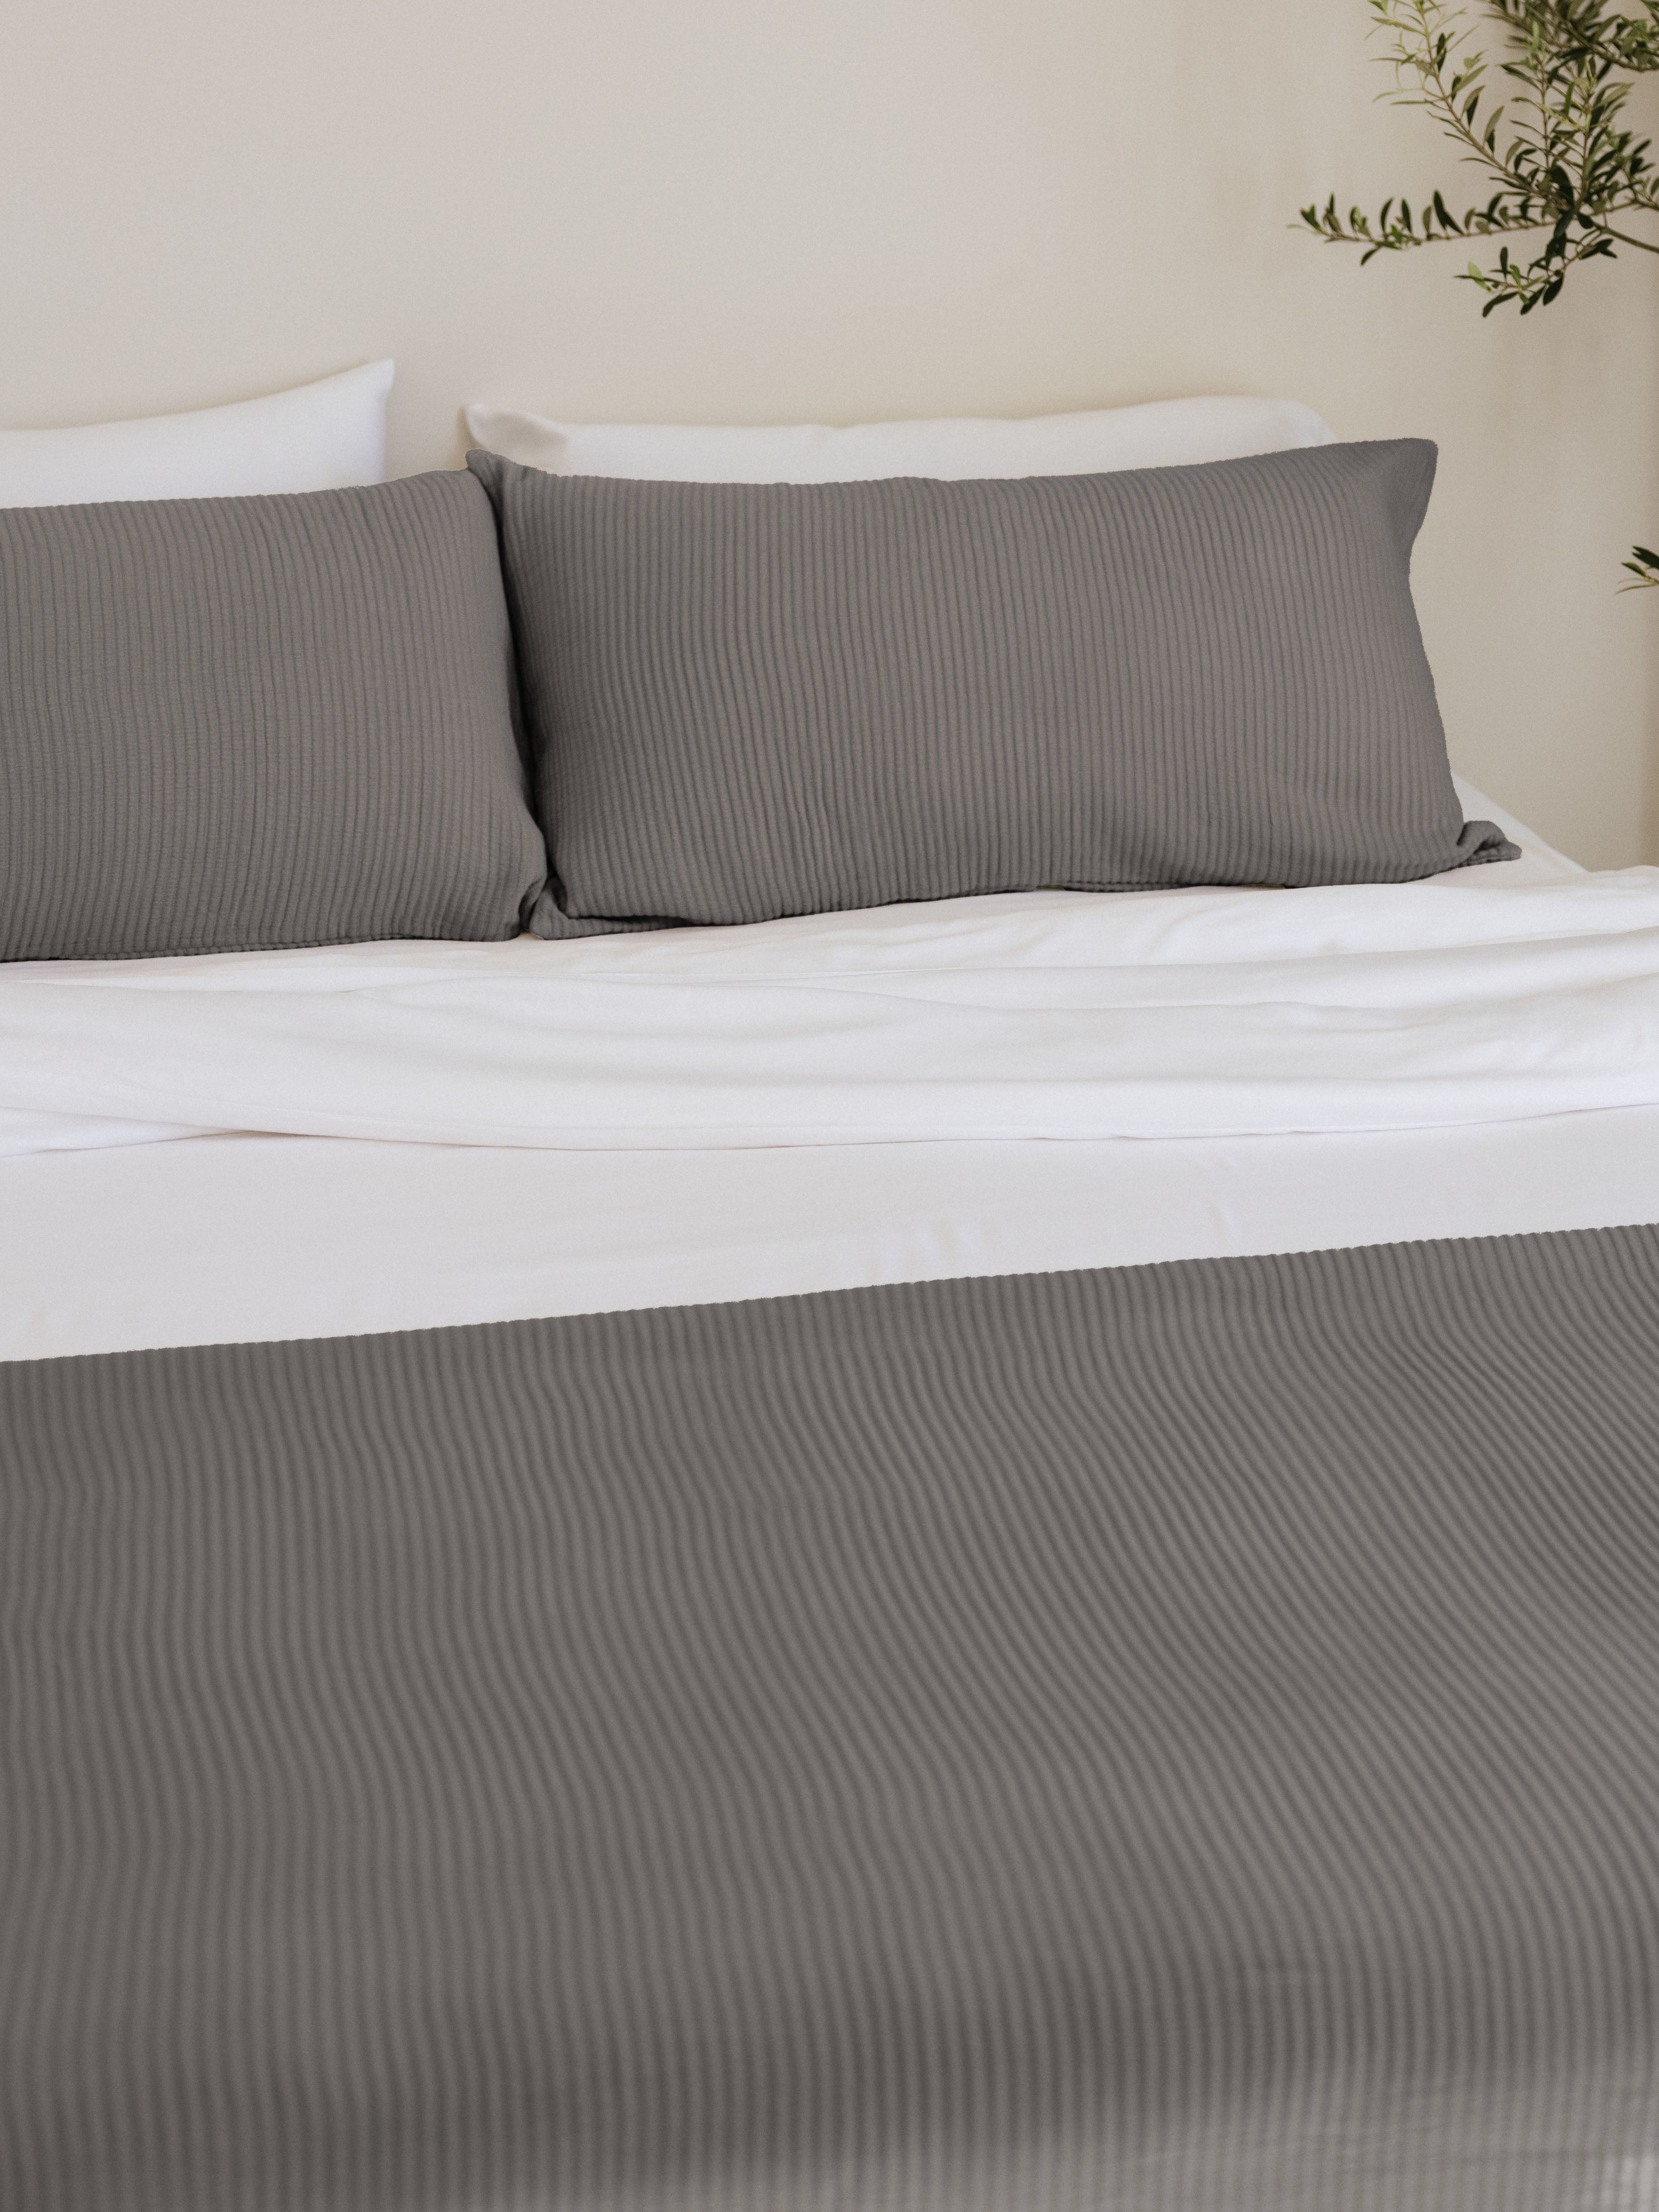 Charcoal shams and coverlet on a bed |Color:Charcoal